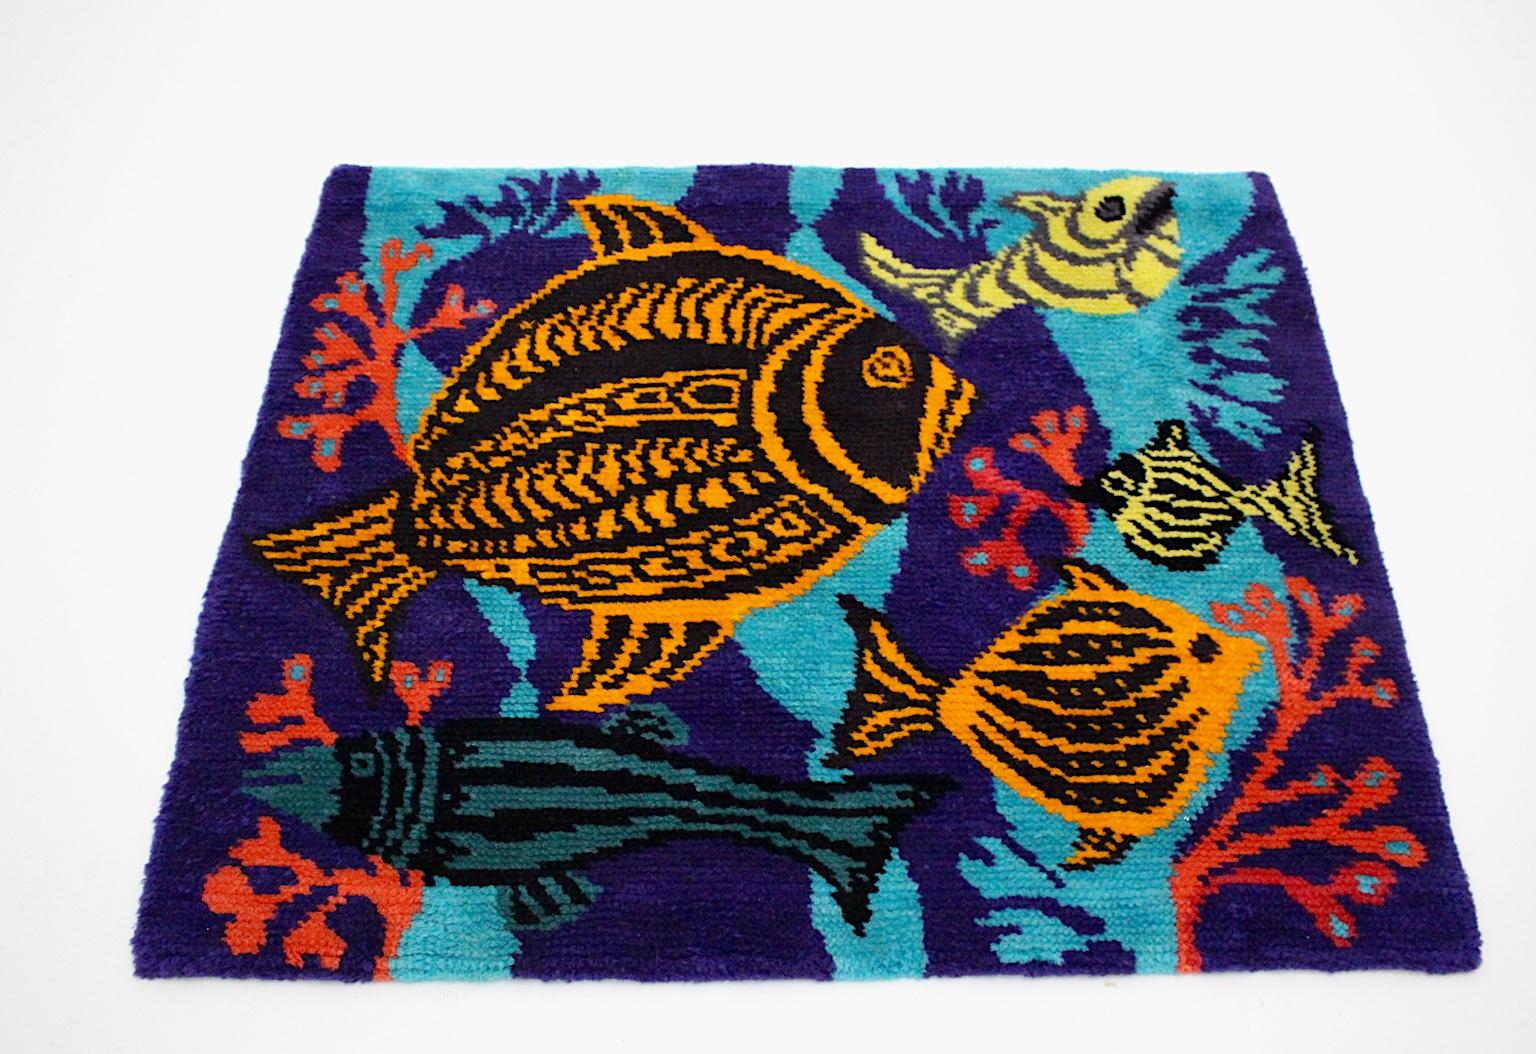 An amazing handmade vintage wall carpet or floor carpet, which was designed and handmade in Austria 1960s.
Lovely animal pattern with five fishes in brightly colors blue, yellow, red, orange and black.
The carpet was made out of wool by hand.
We